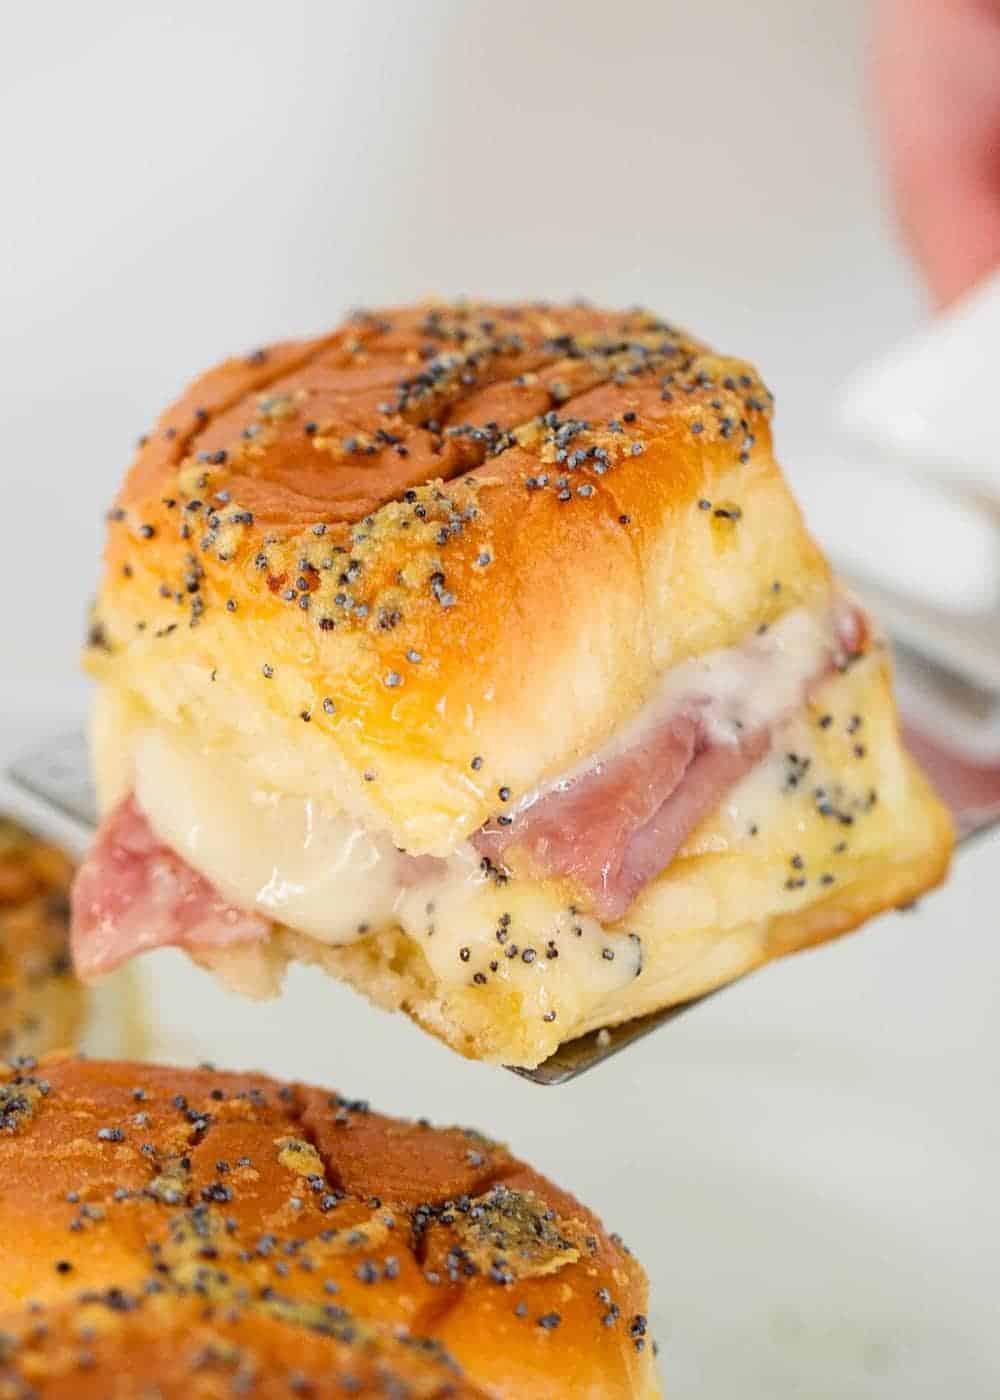 Lifting ham and cheese roll out of baking dish.